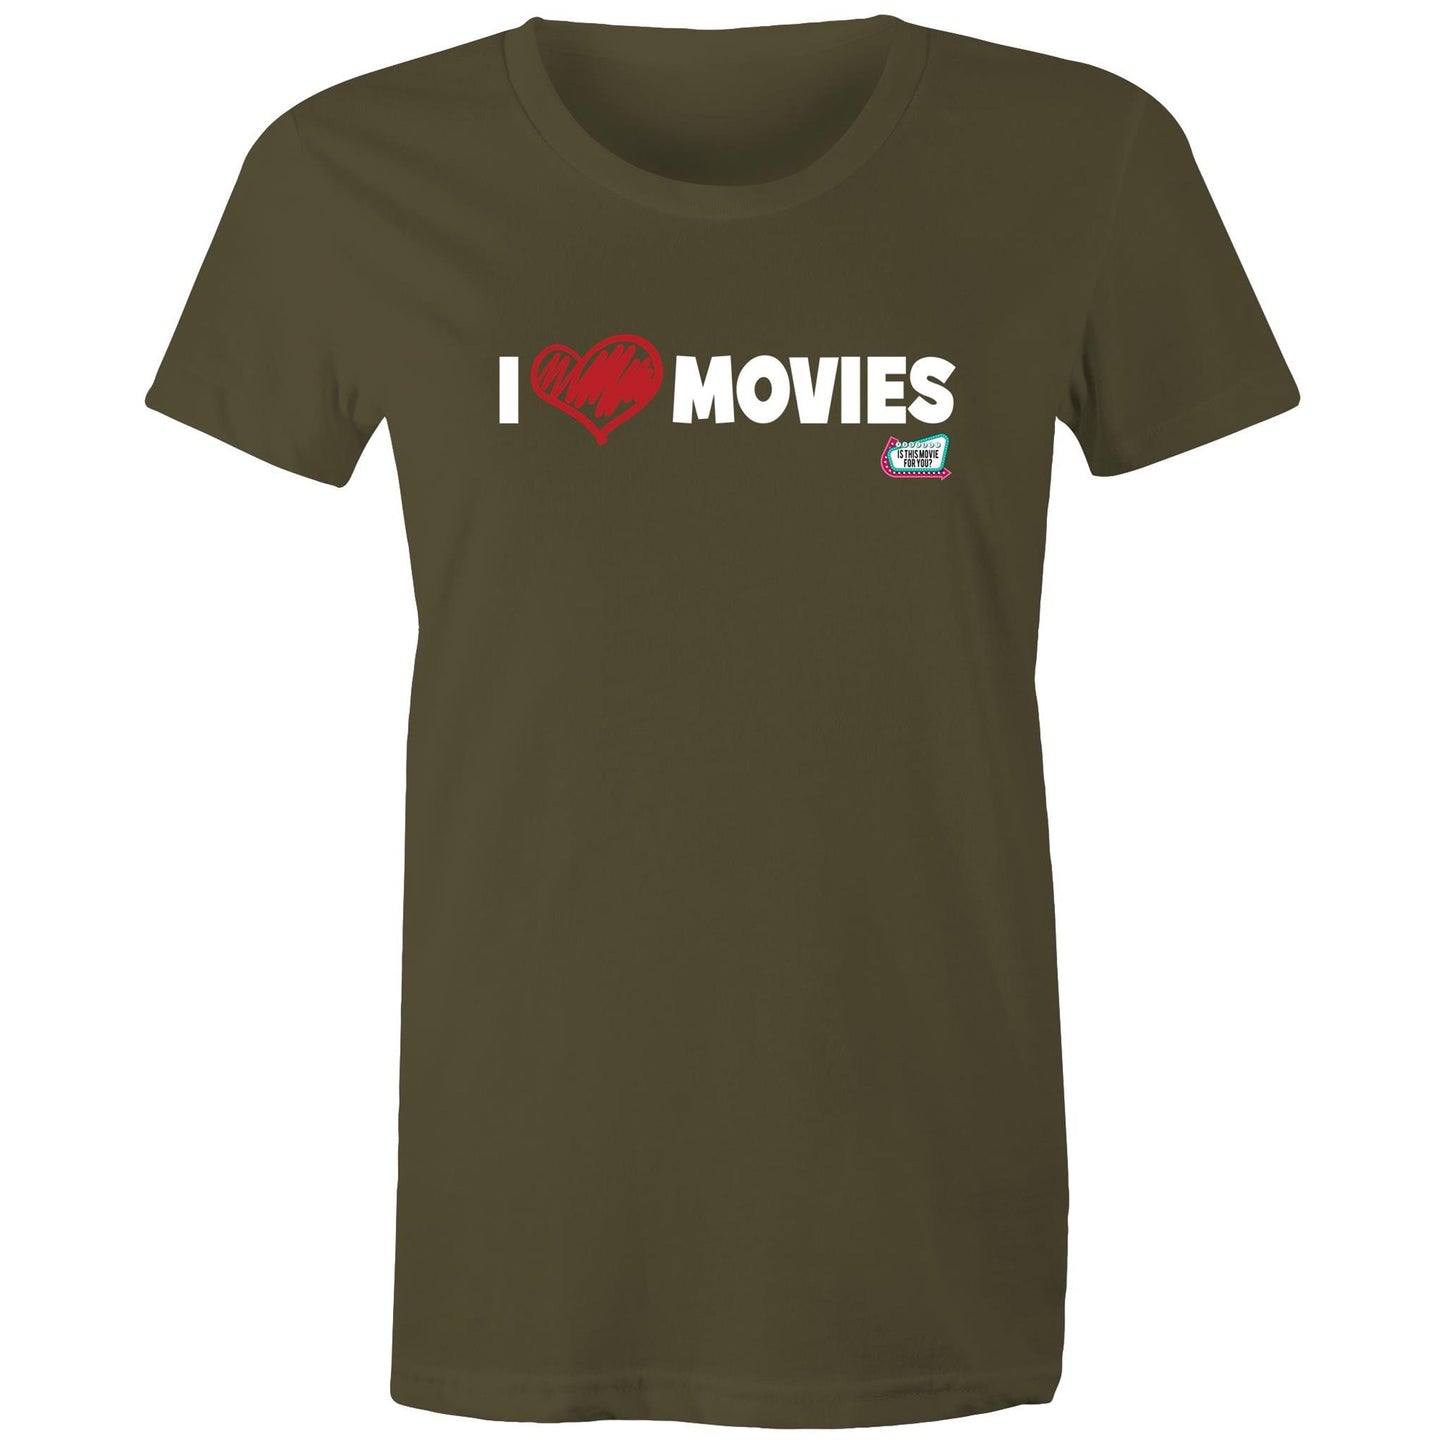 'I Love Movies' - Is This Movie For You? (white font) - AS Colour - Women's Maple Tee